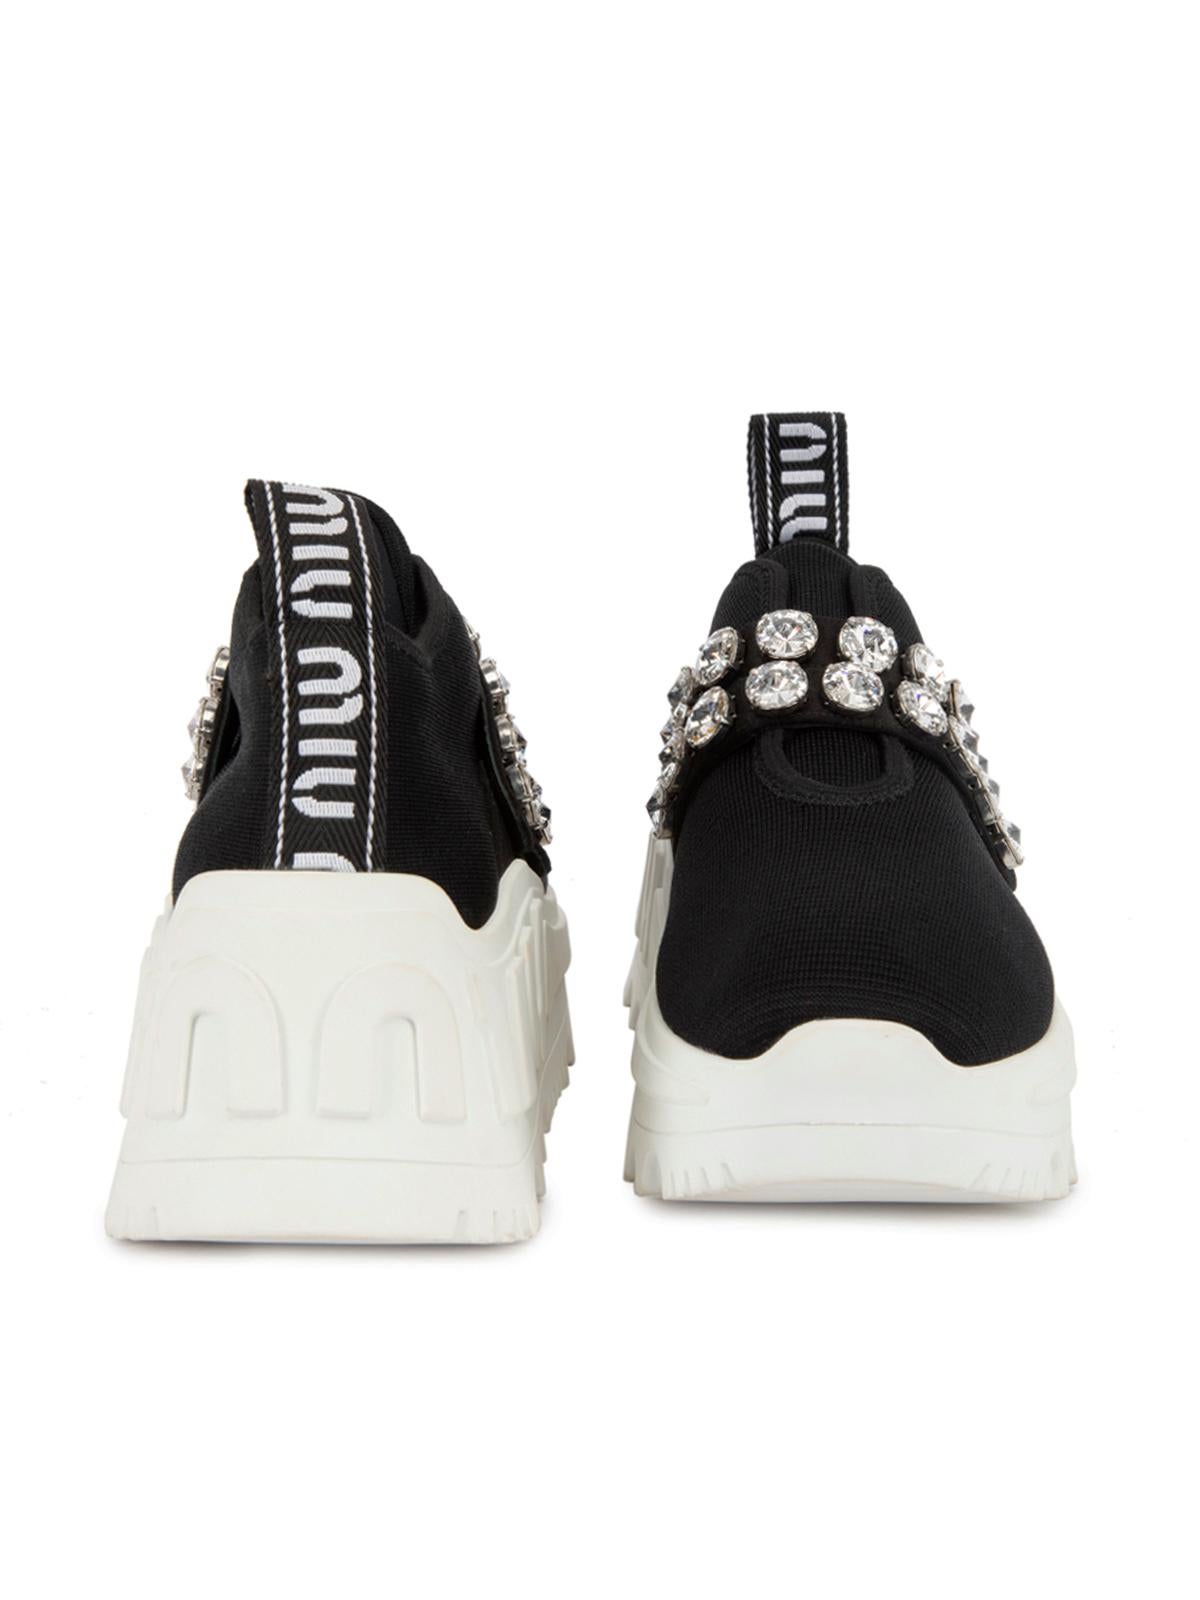 Pre-Loved Miu Miu Women's Black Crystal Embellished Chunky Sneaker In Excellent Condition In London, GB